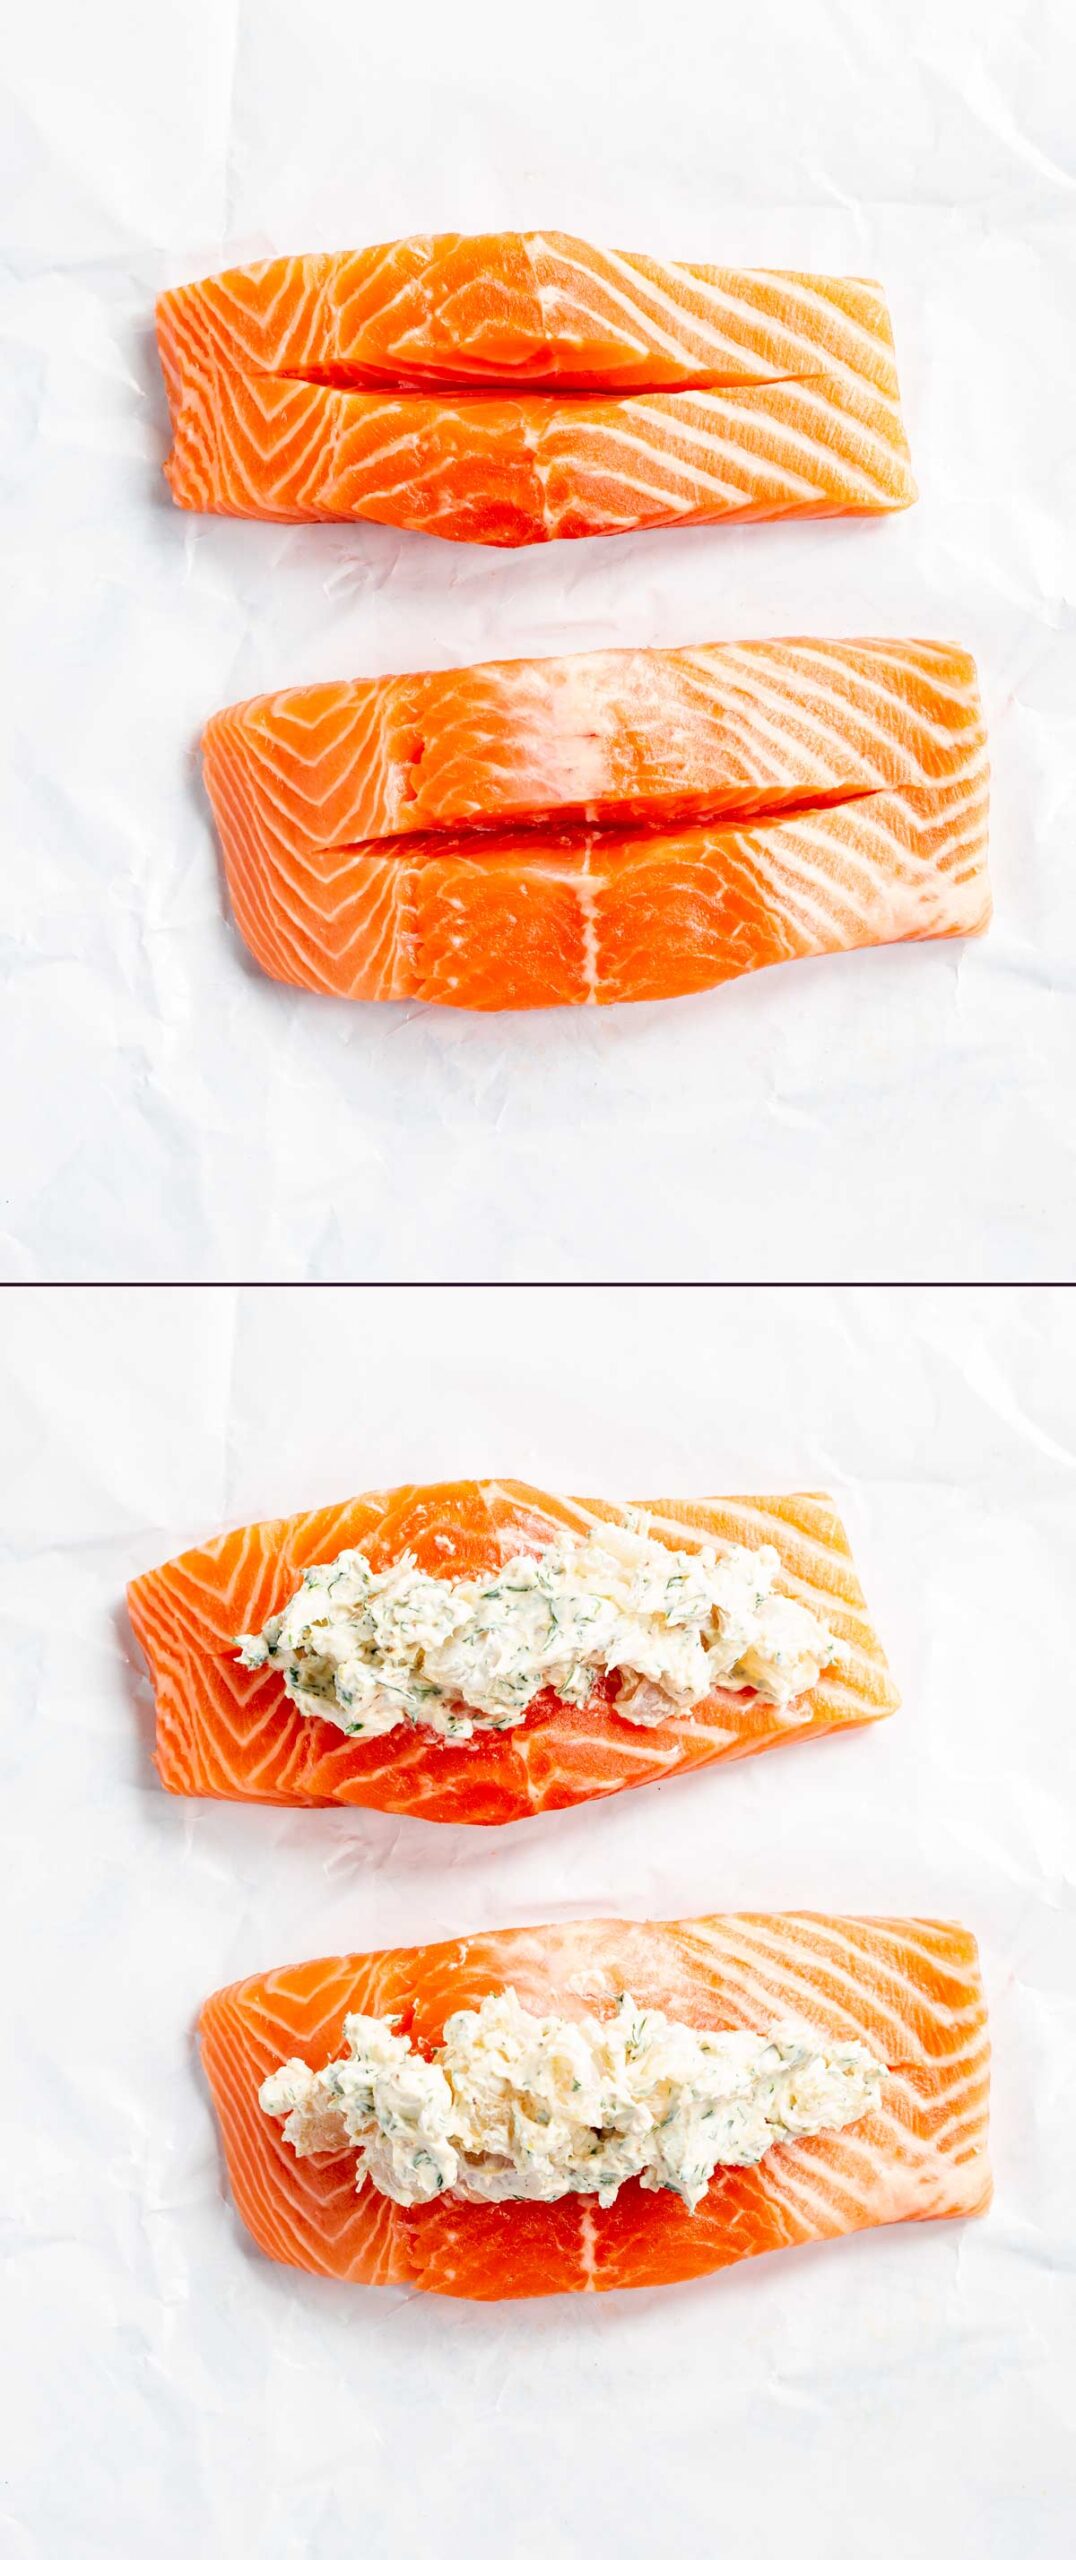 two pictures of raw salmon showing how to cut and stuff it